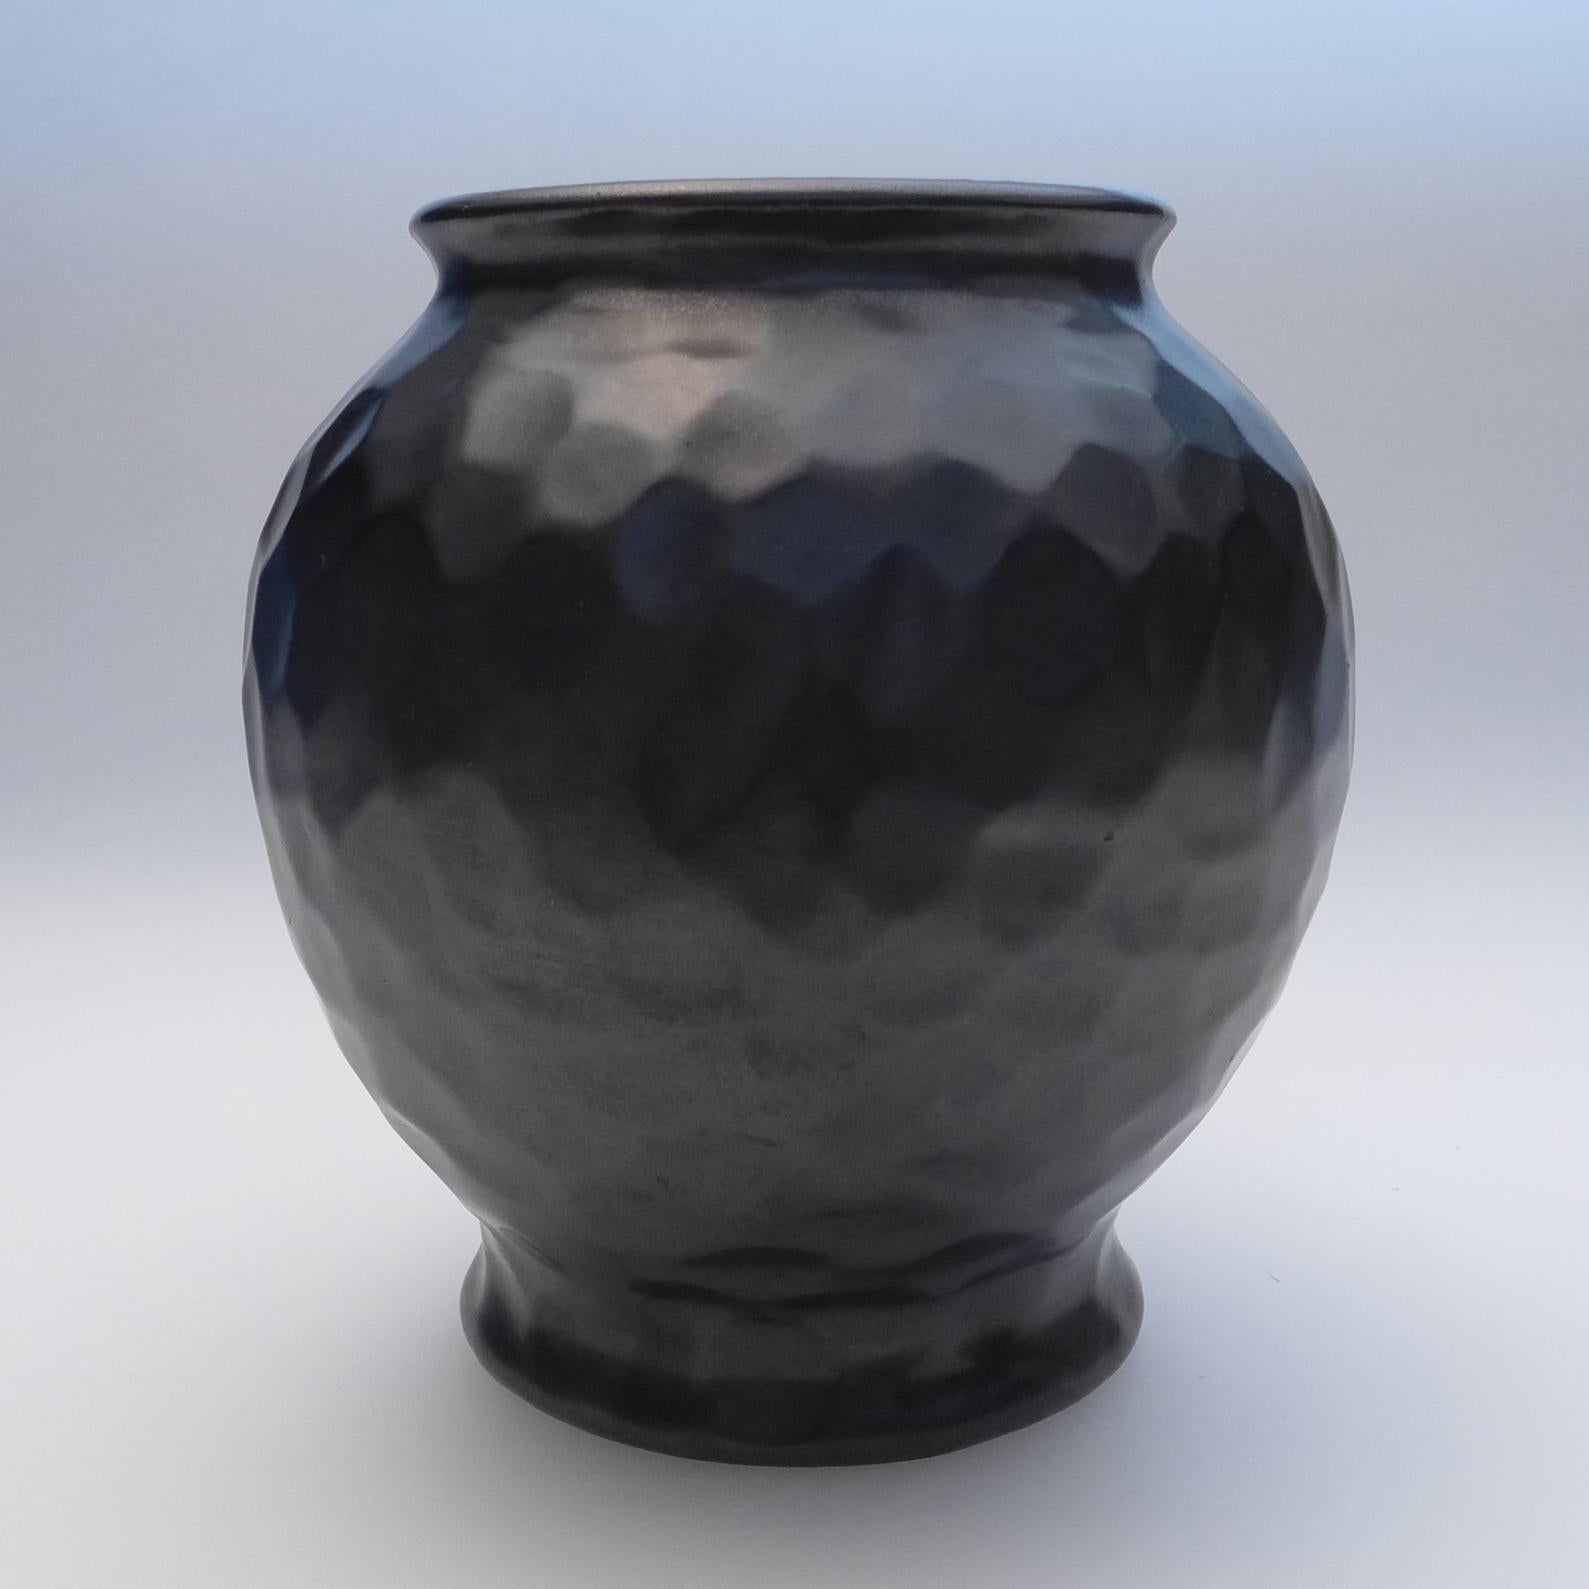 Elegant dimple vase designed by Gerardus Klinkenberg and produced at the Katwijk factory in the Netherlands, circa 1920s
Materials: Ceramic stoneware with a smooth black matte glaze.